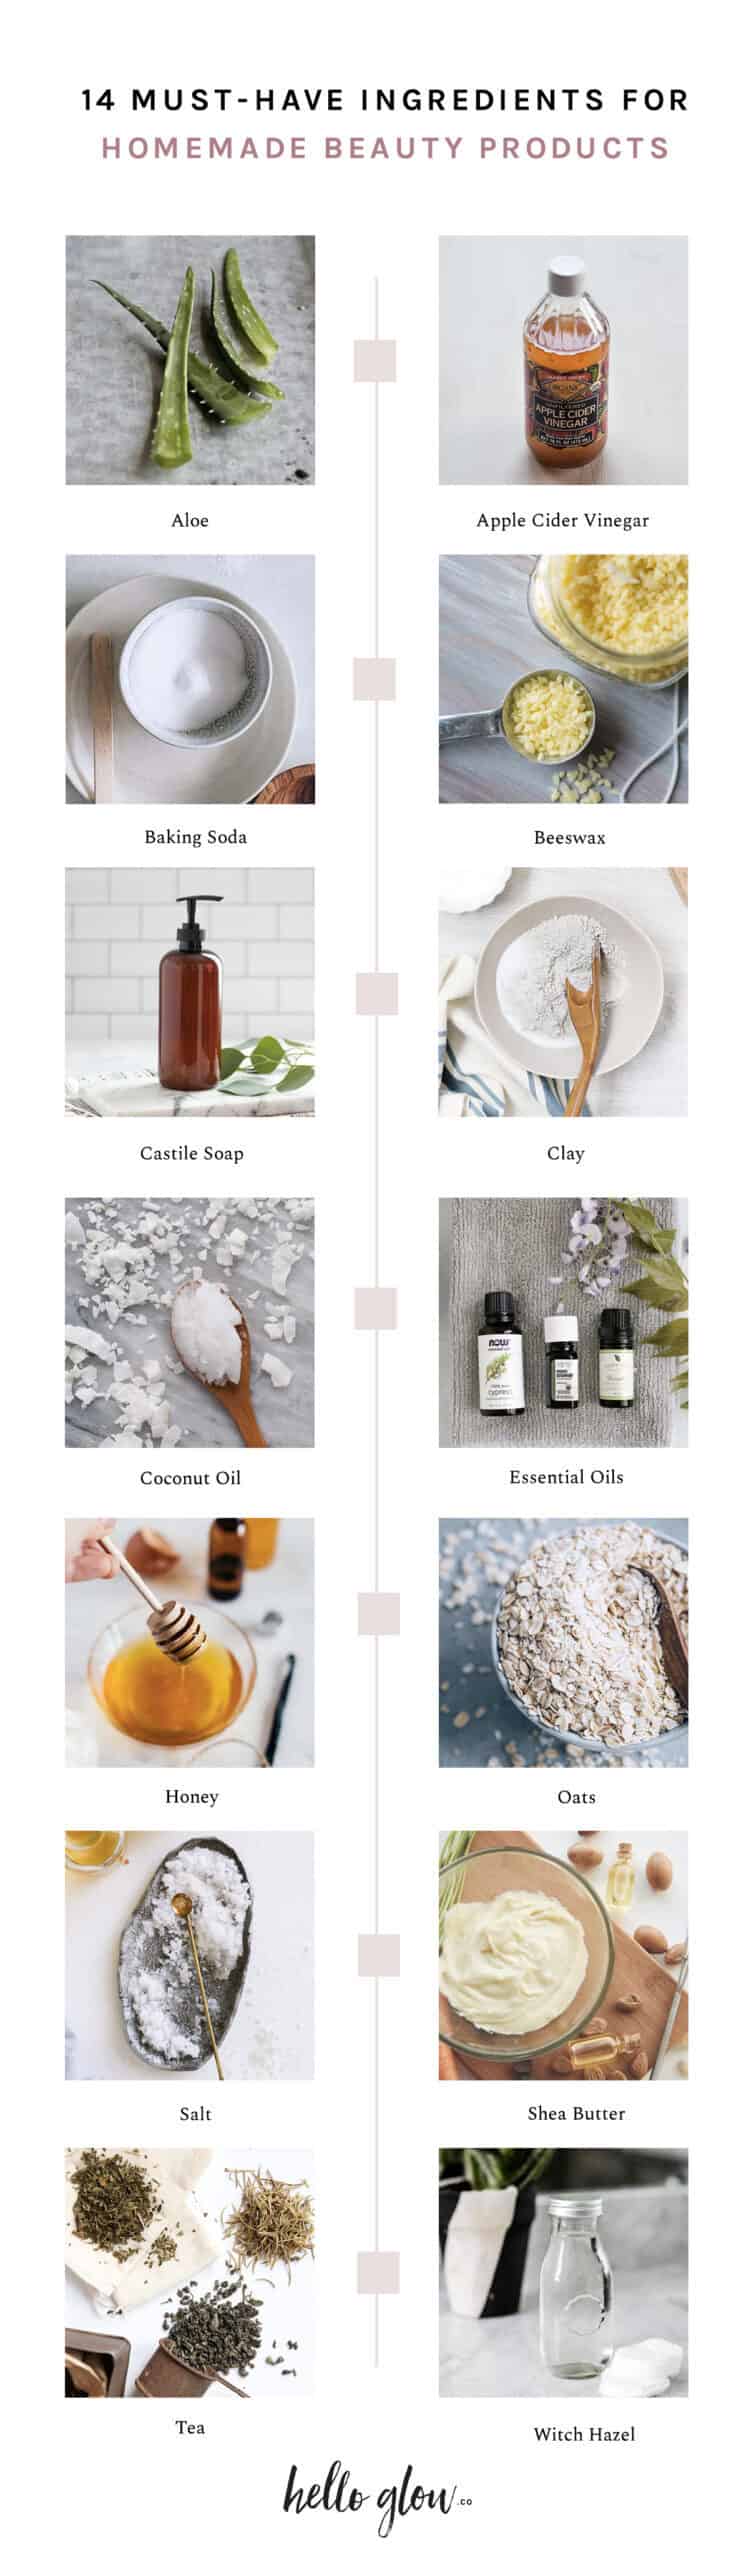 14 Must-Have Ingredients for Homemade Beauty Products